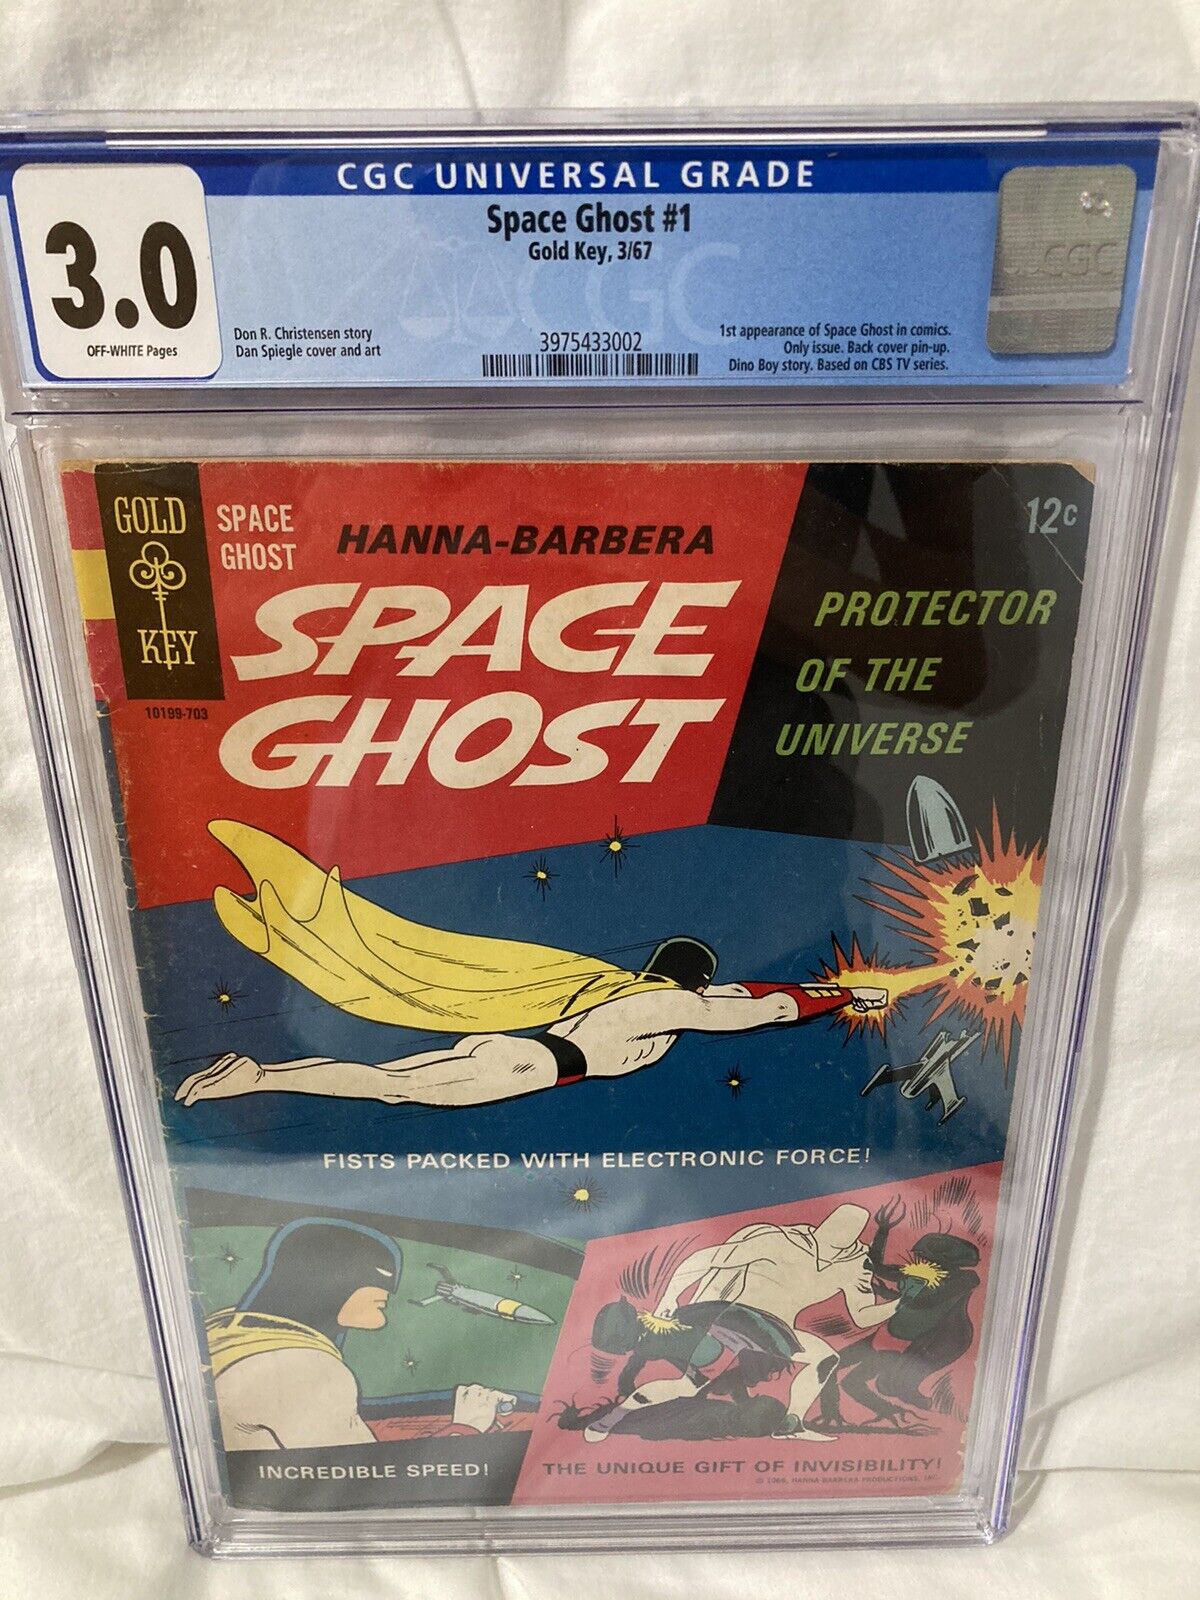 Space Ghost #1 (March 1967, Gold Key Comics) Silver Age, Rare, CGC Graded (3.0)